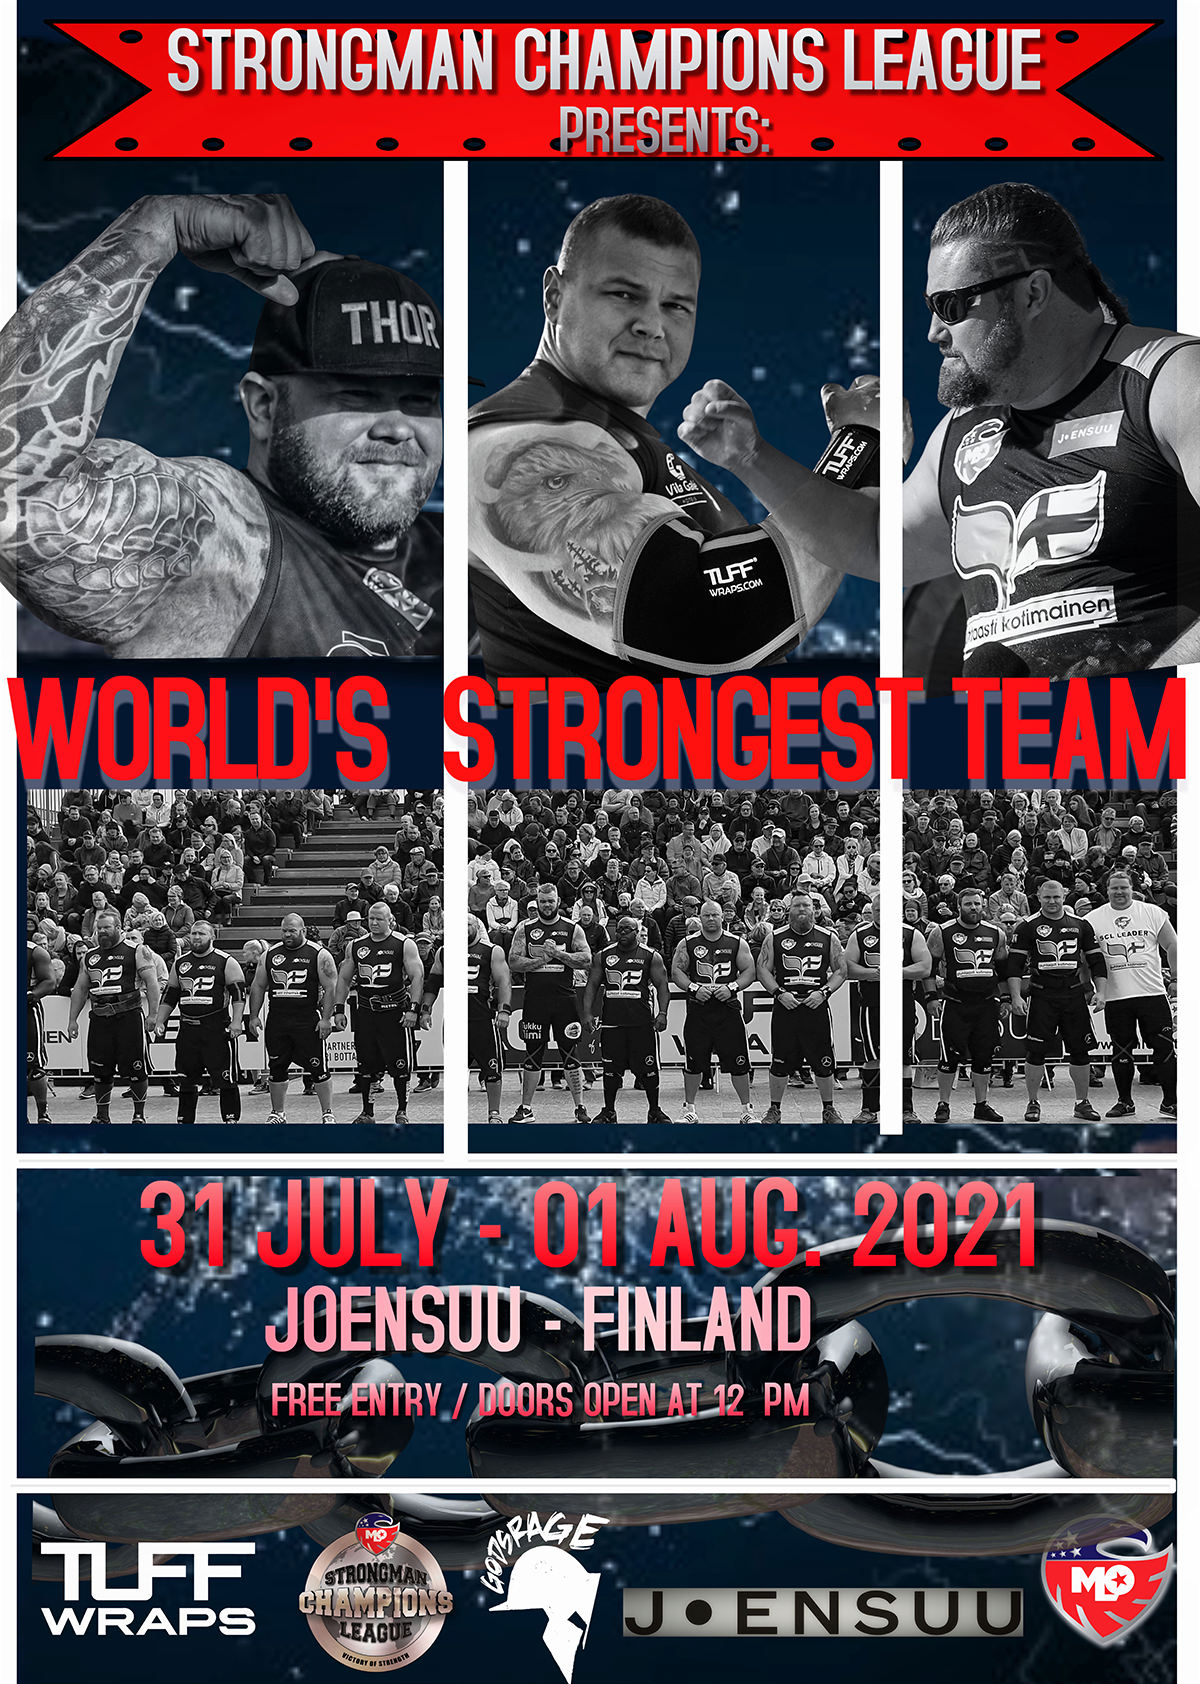 The World S Strongest Team Organized In Finland 2021 Strongman Champions League